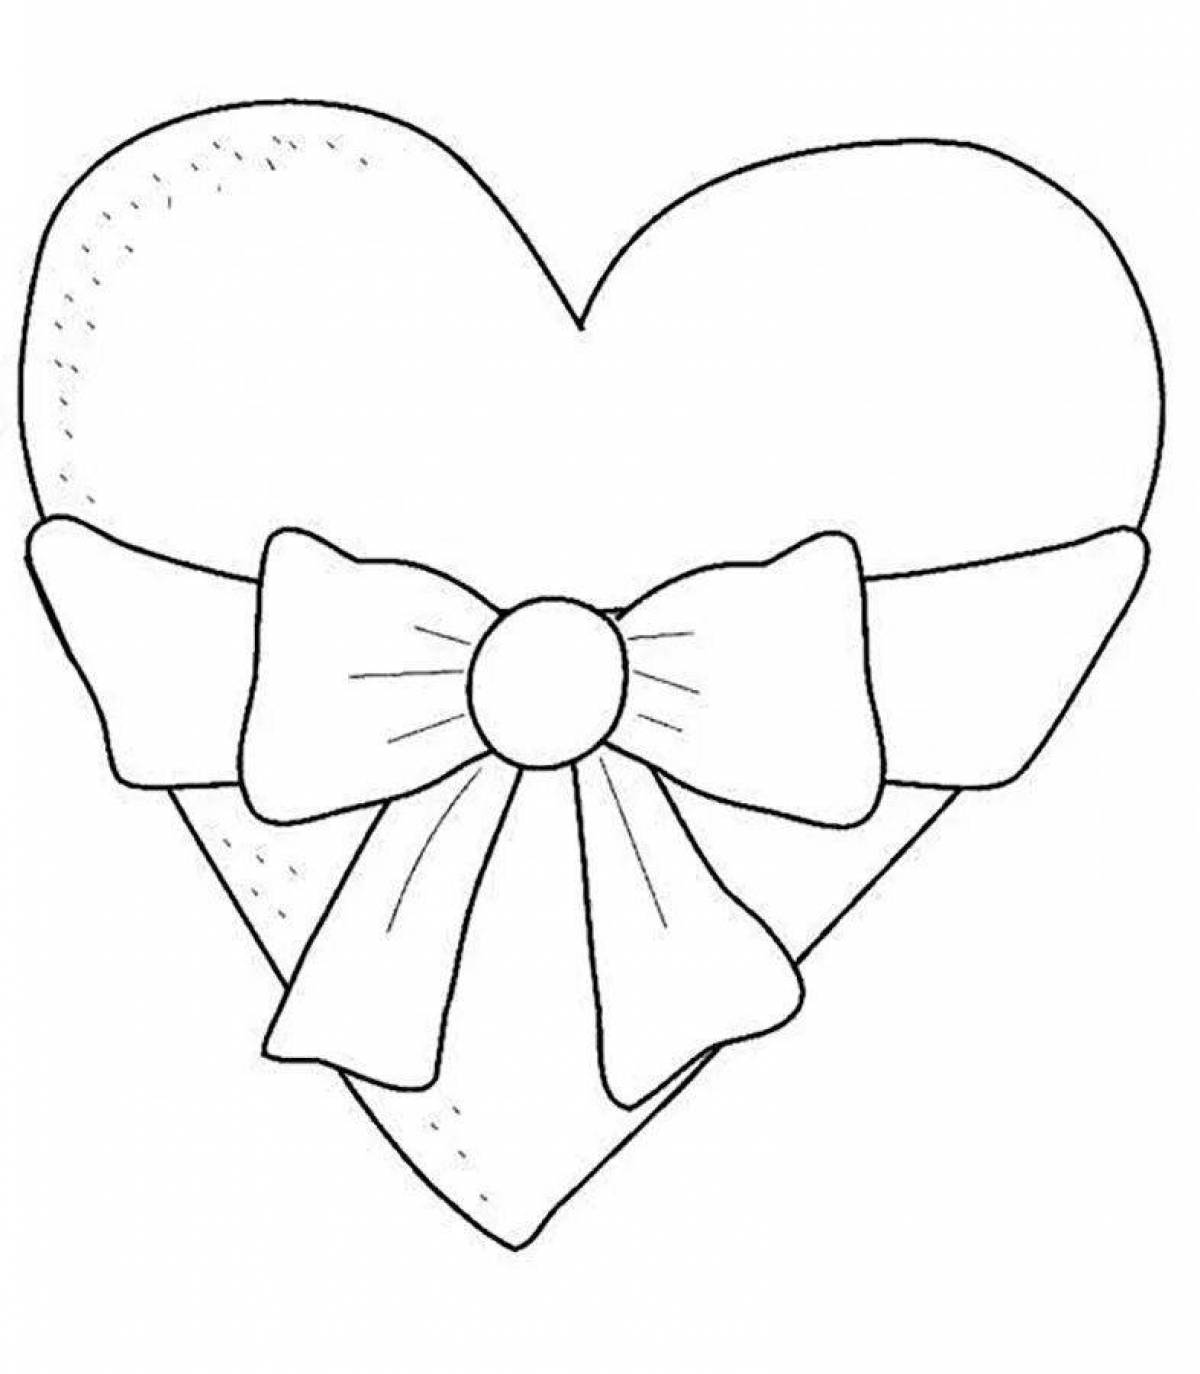 Coloring book amazing bow